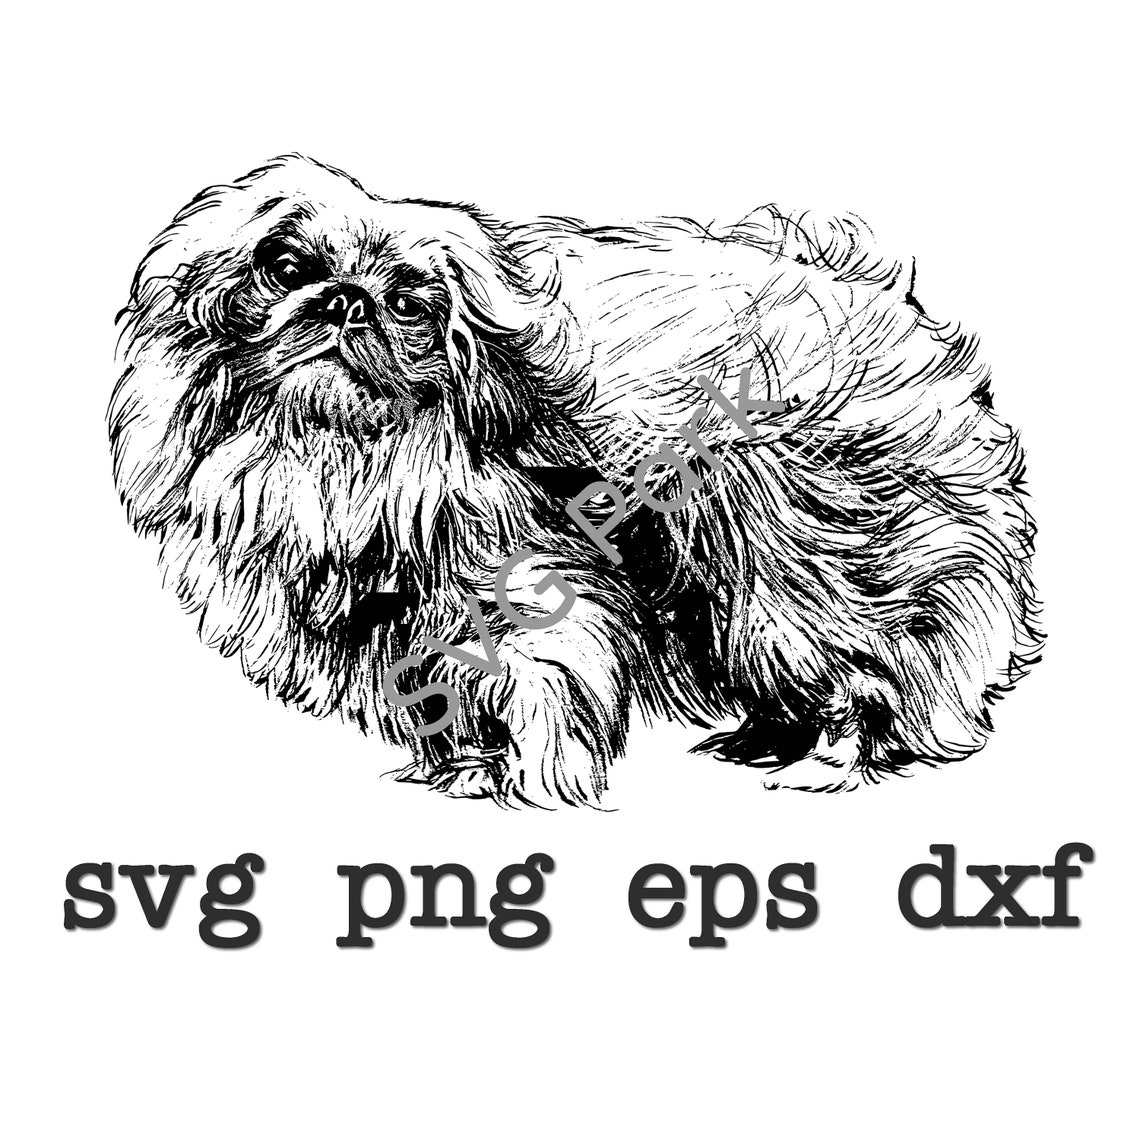 Pekingese svg png eps dxf Dog Vector Silhouette Cameo | Etsy